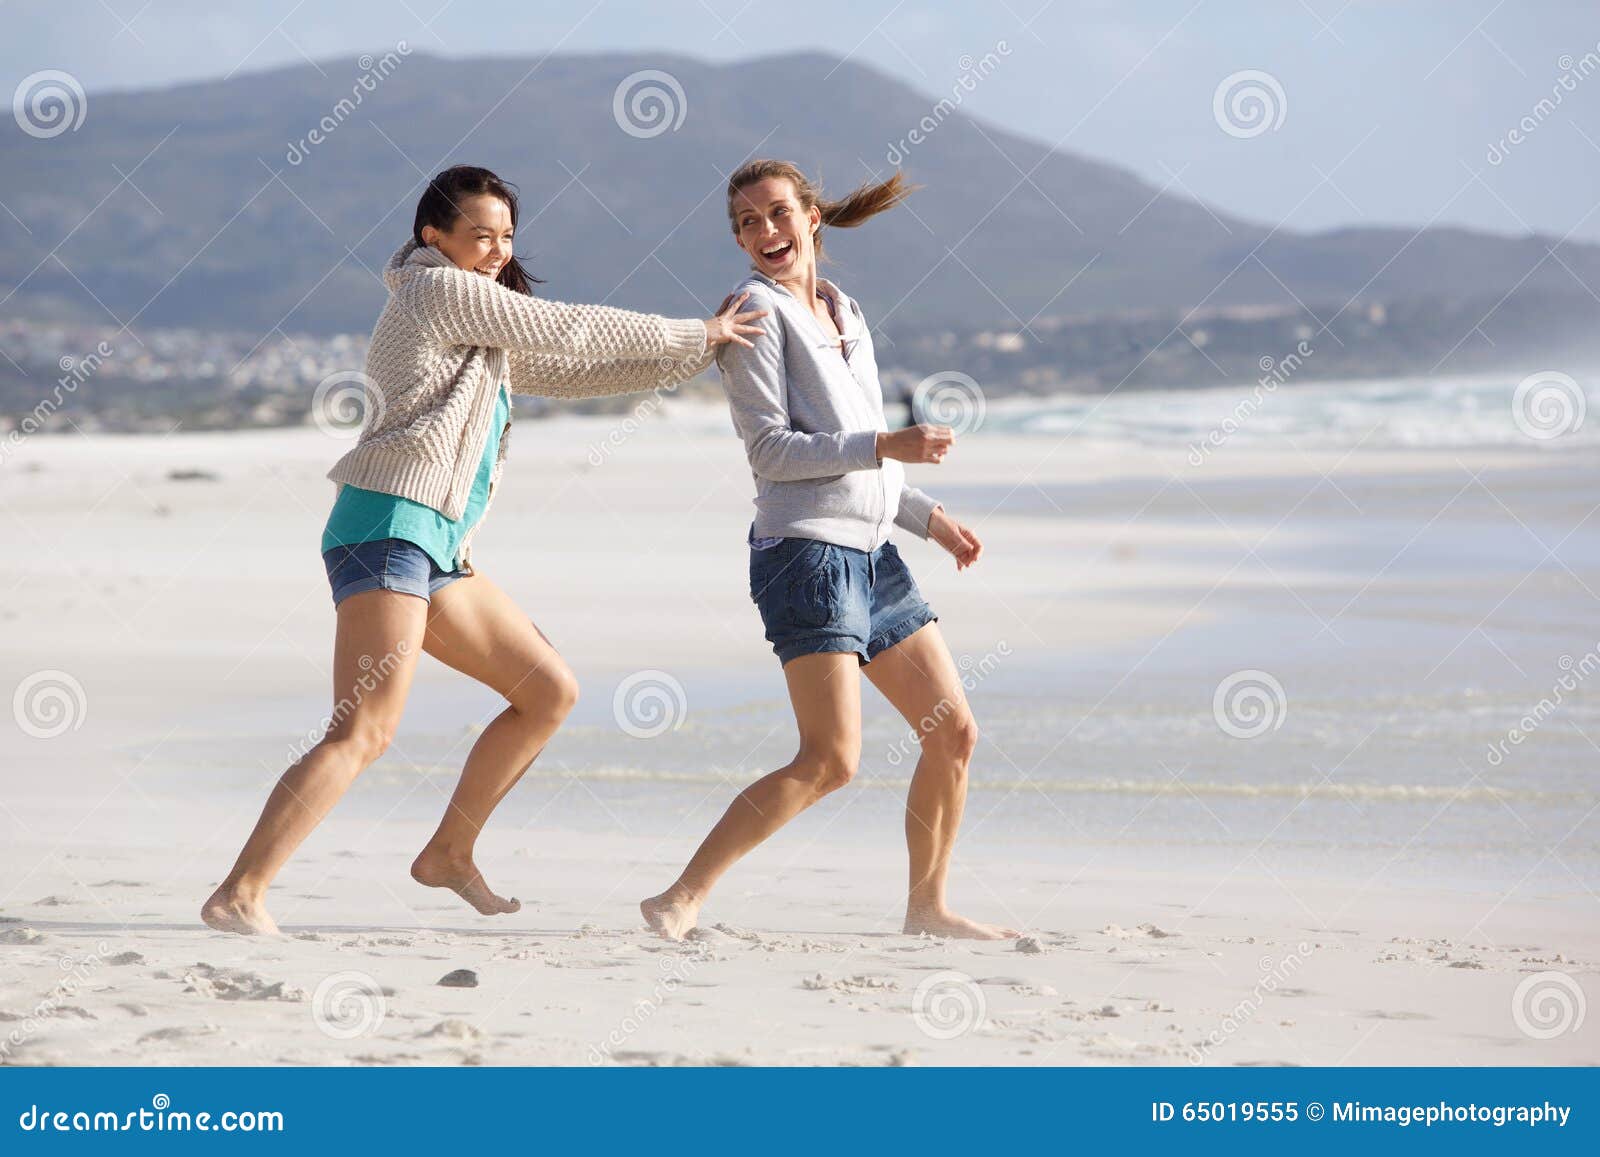 Two Female Friends Playing on the Beach Stock Image - Image of paradise ...